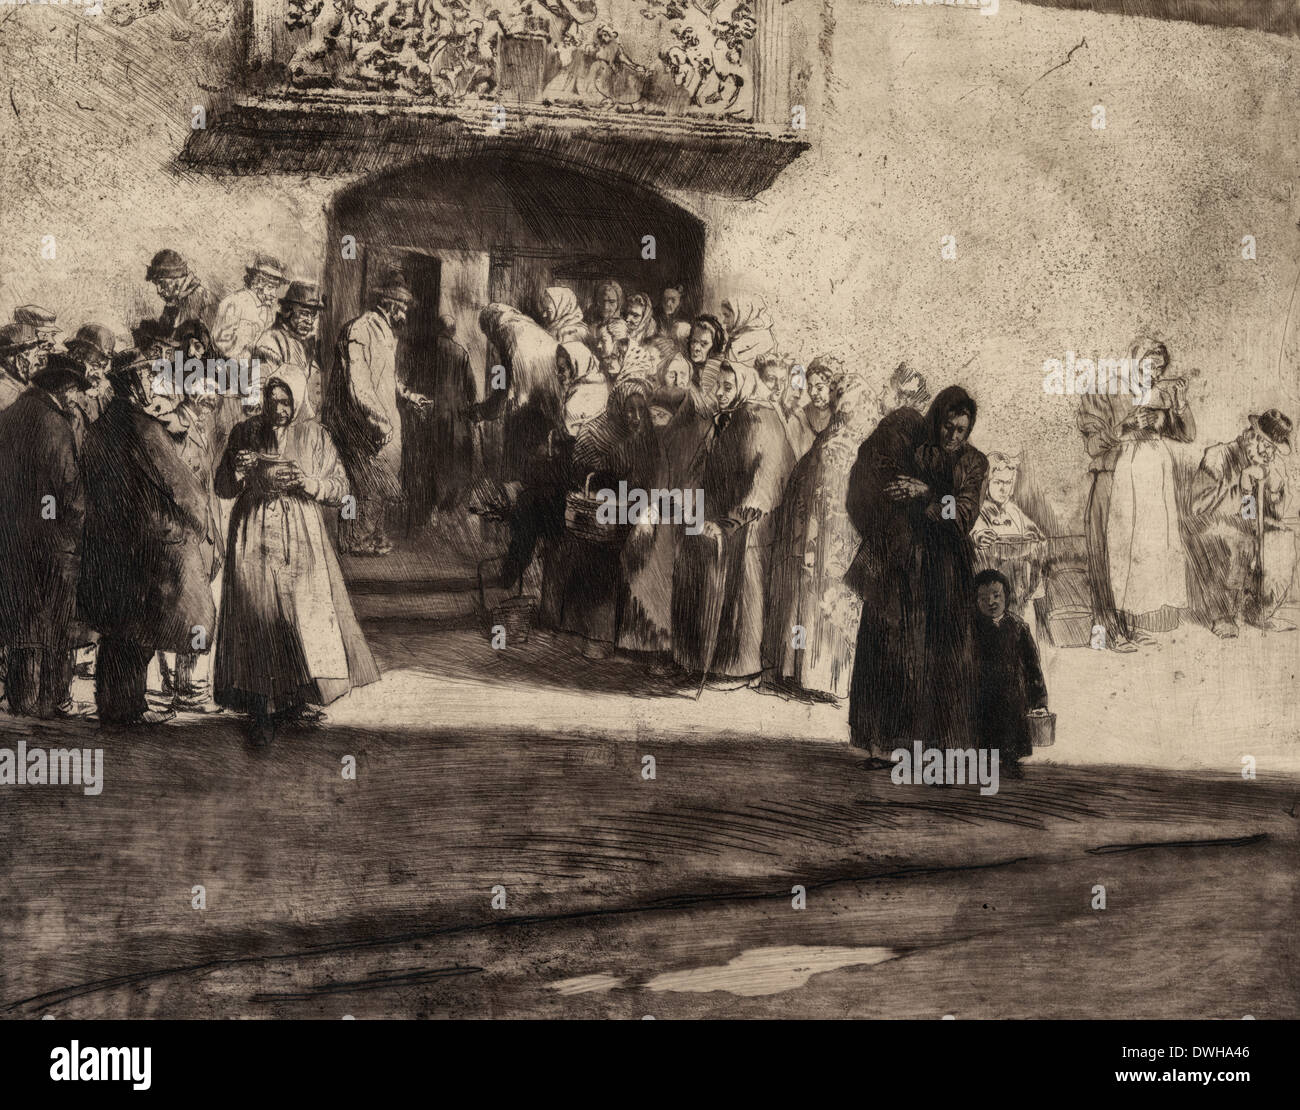 Die klostersuppe - The Monastery Soup - Lining up for soup at the monastery, circa 1850 Stock Photo